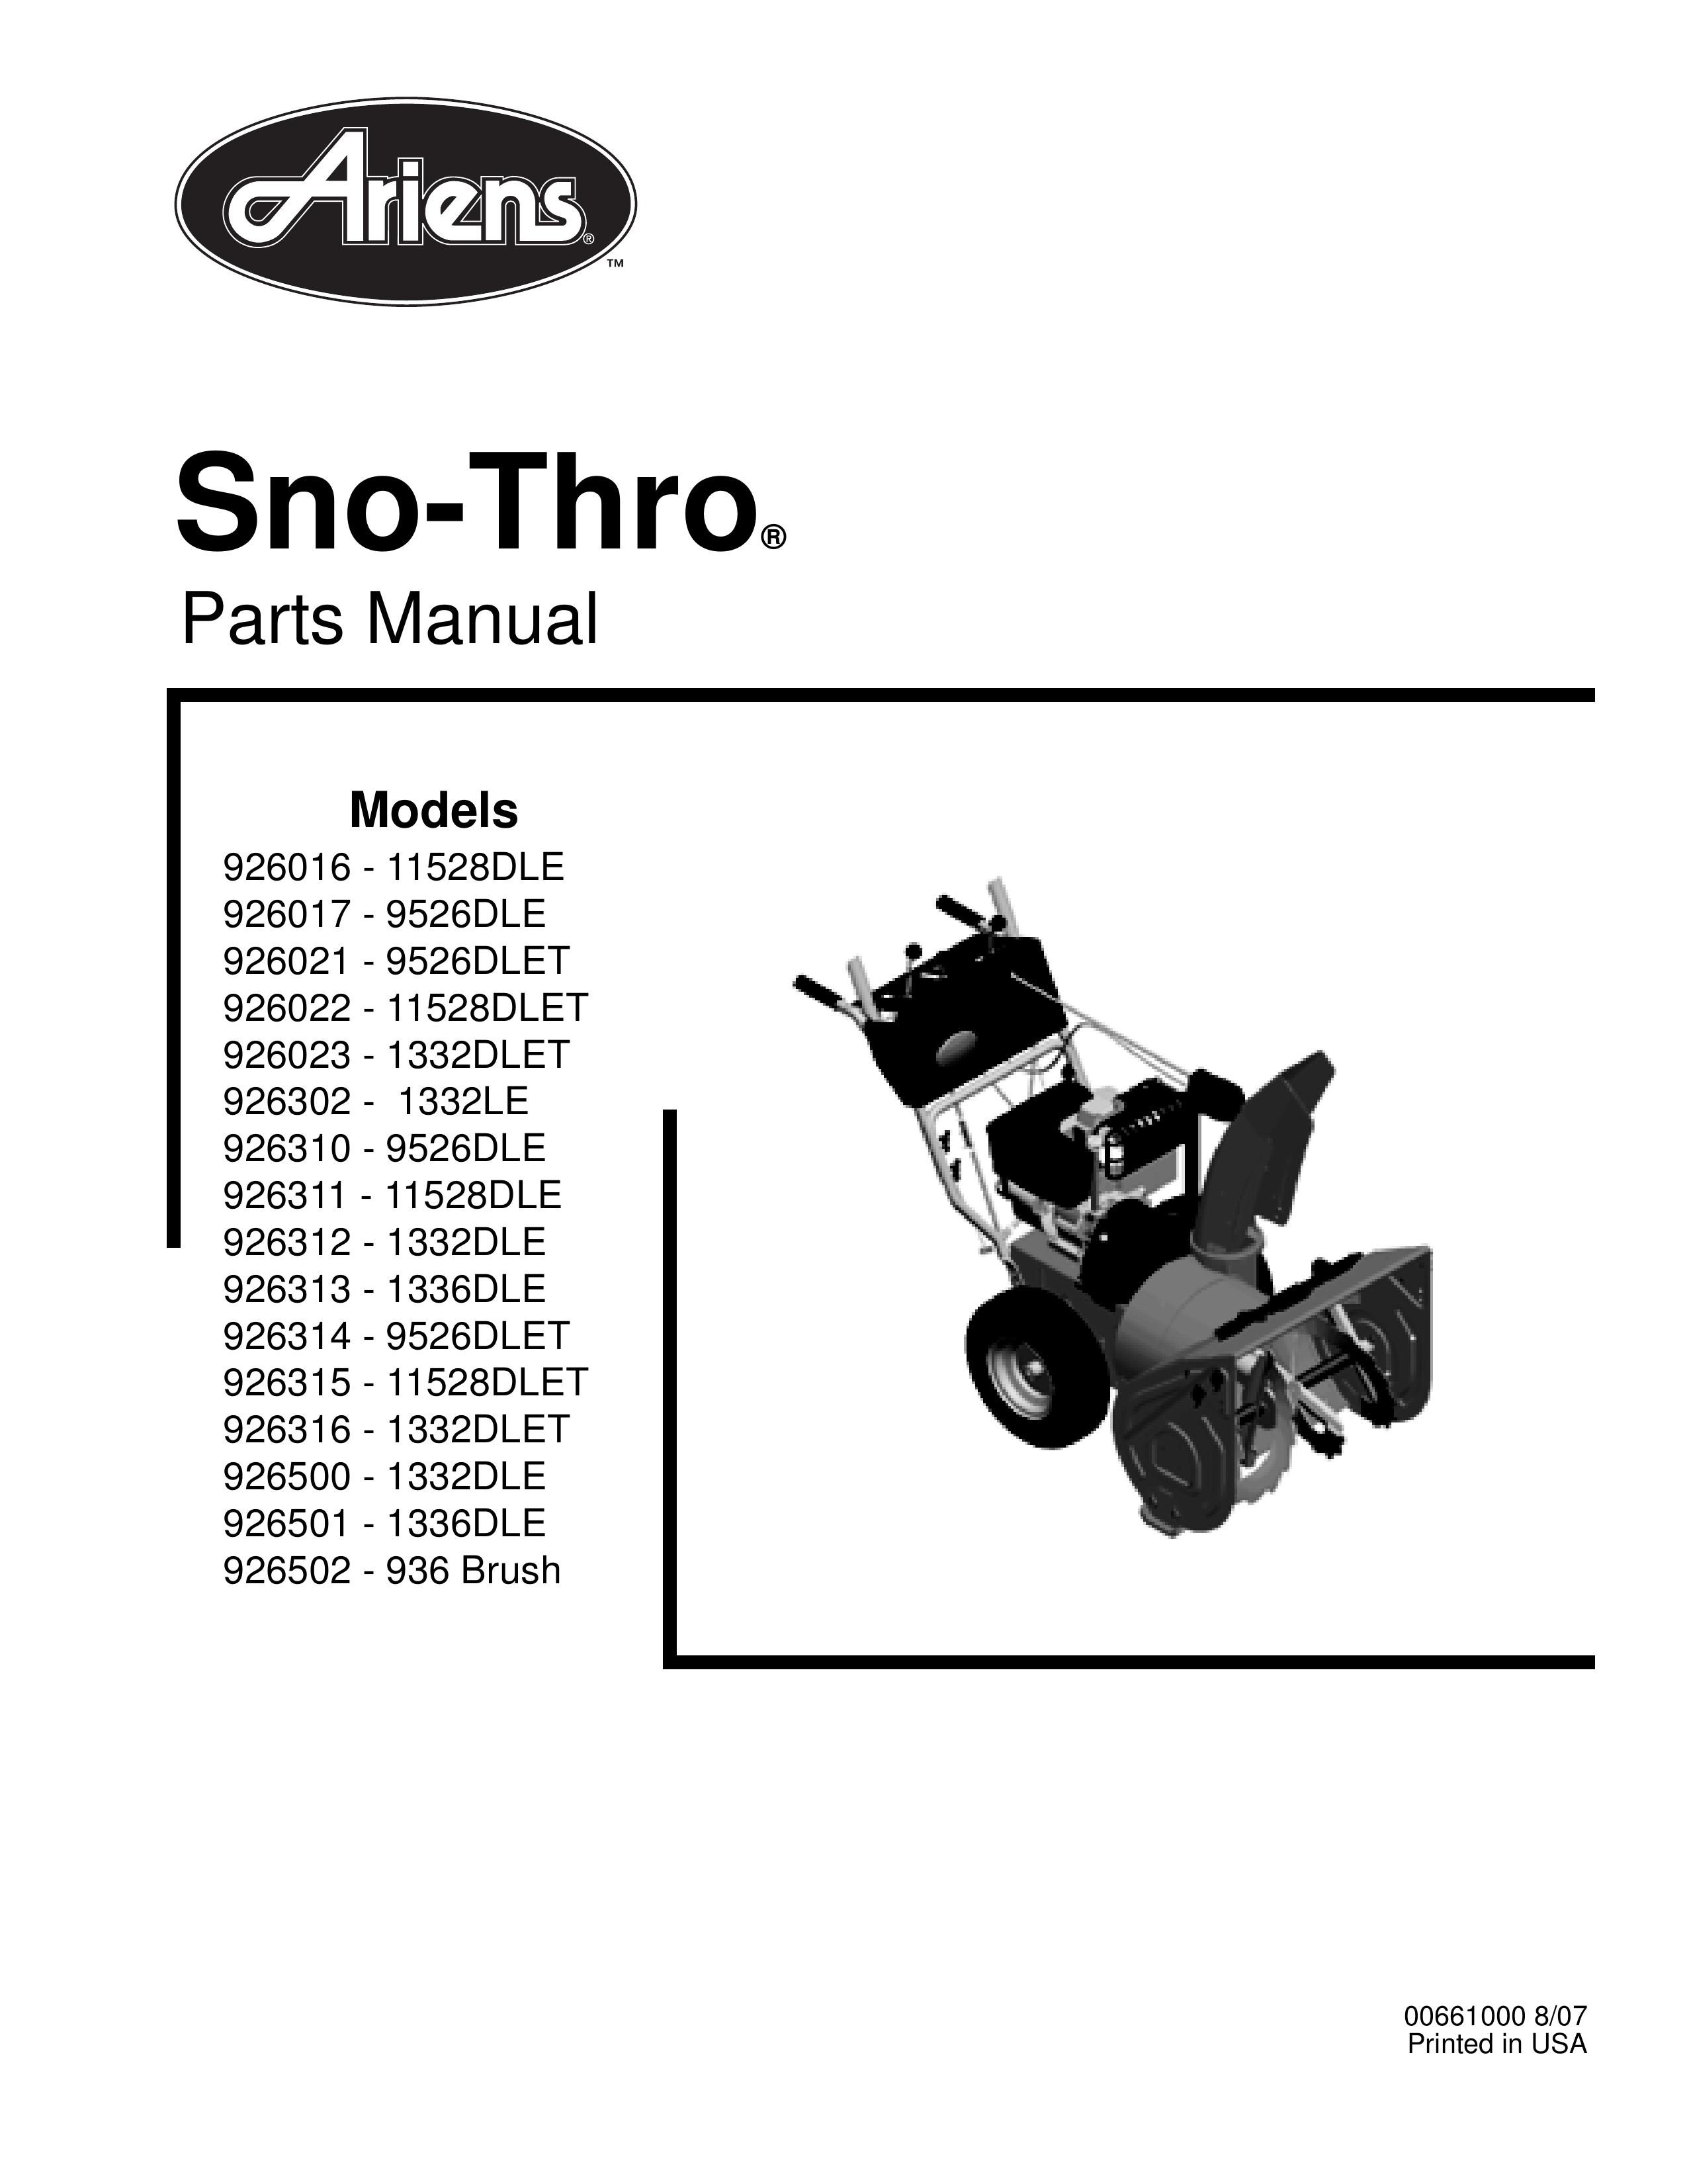 Ariens 926316 - 1332DLET Snow Blower Attachment User Manual